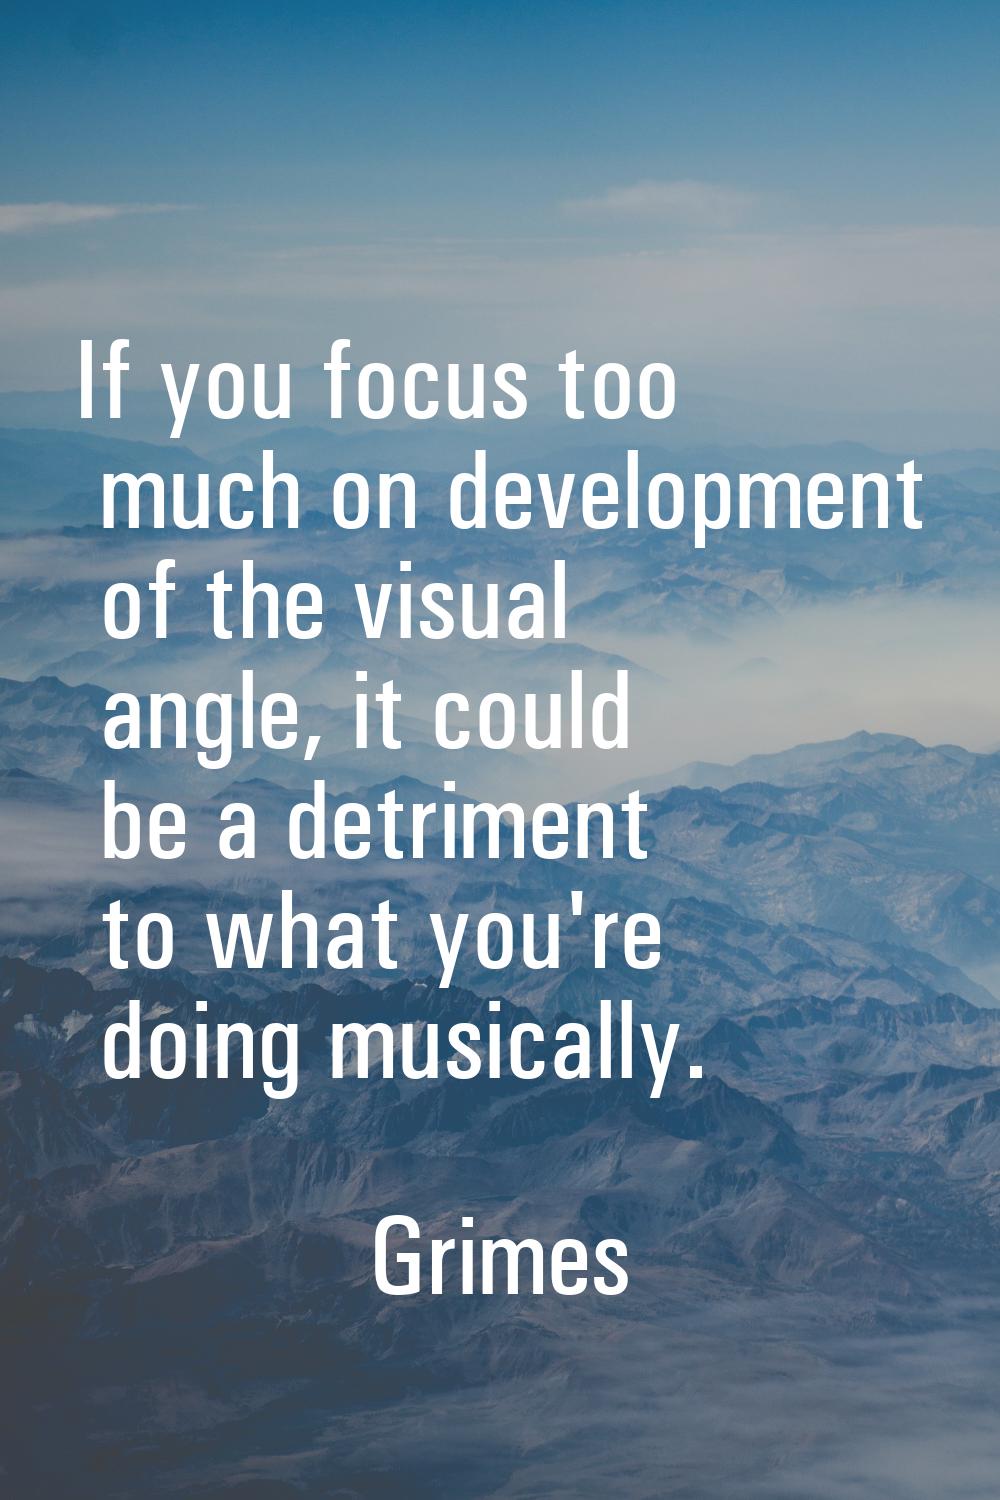 If you focus too much on development of the visual angle, it could be a detriment to what you're do